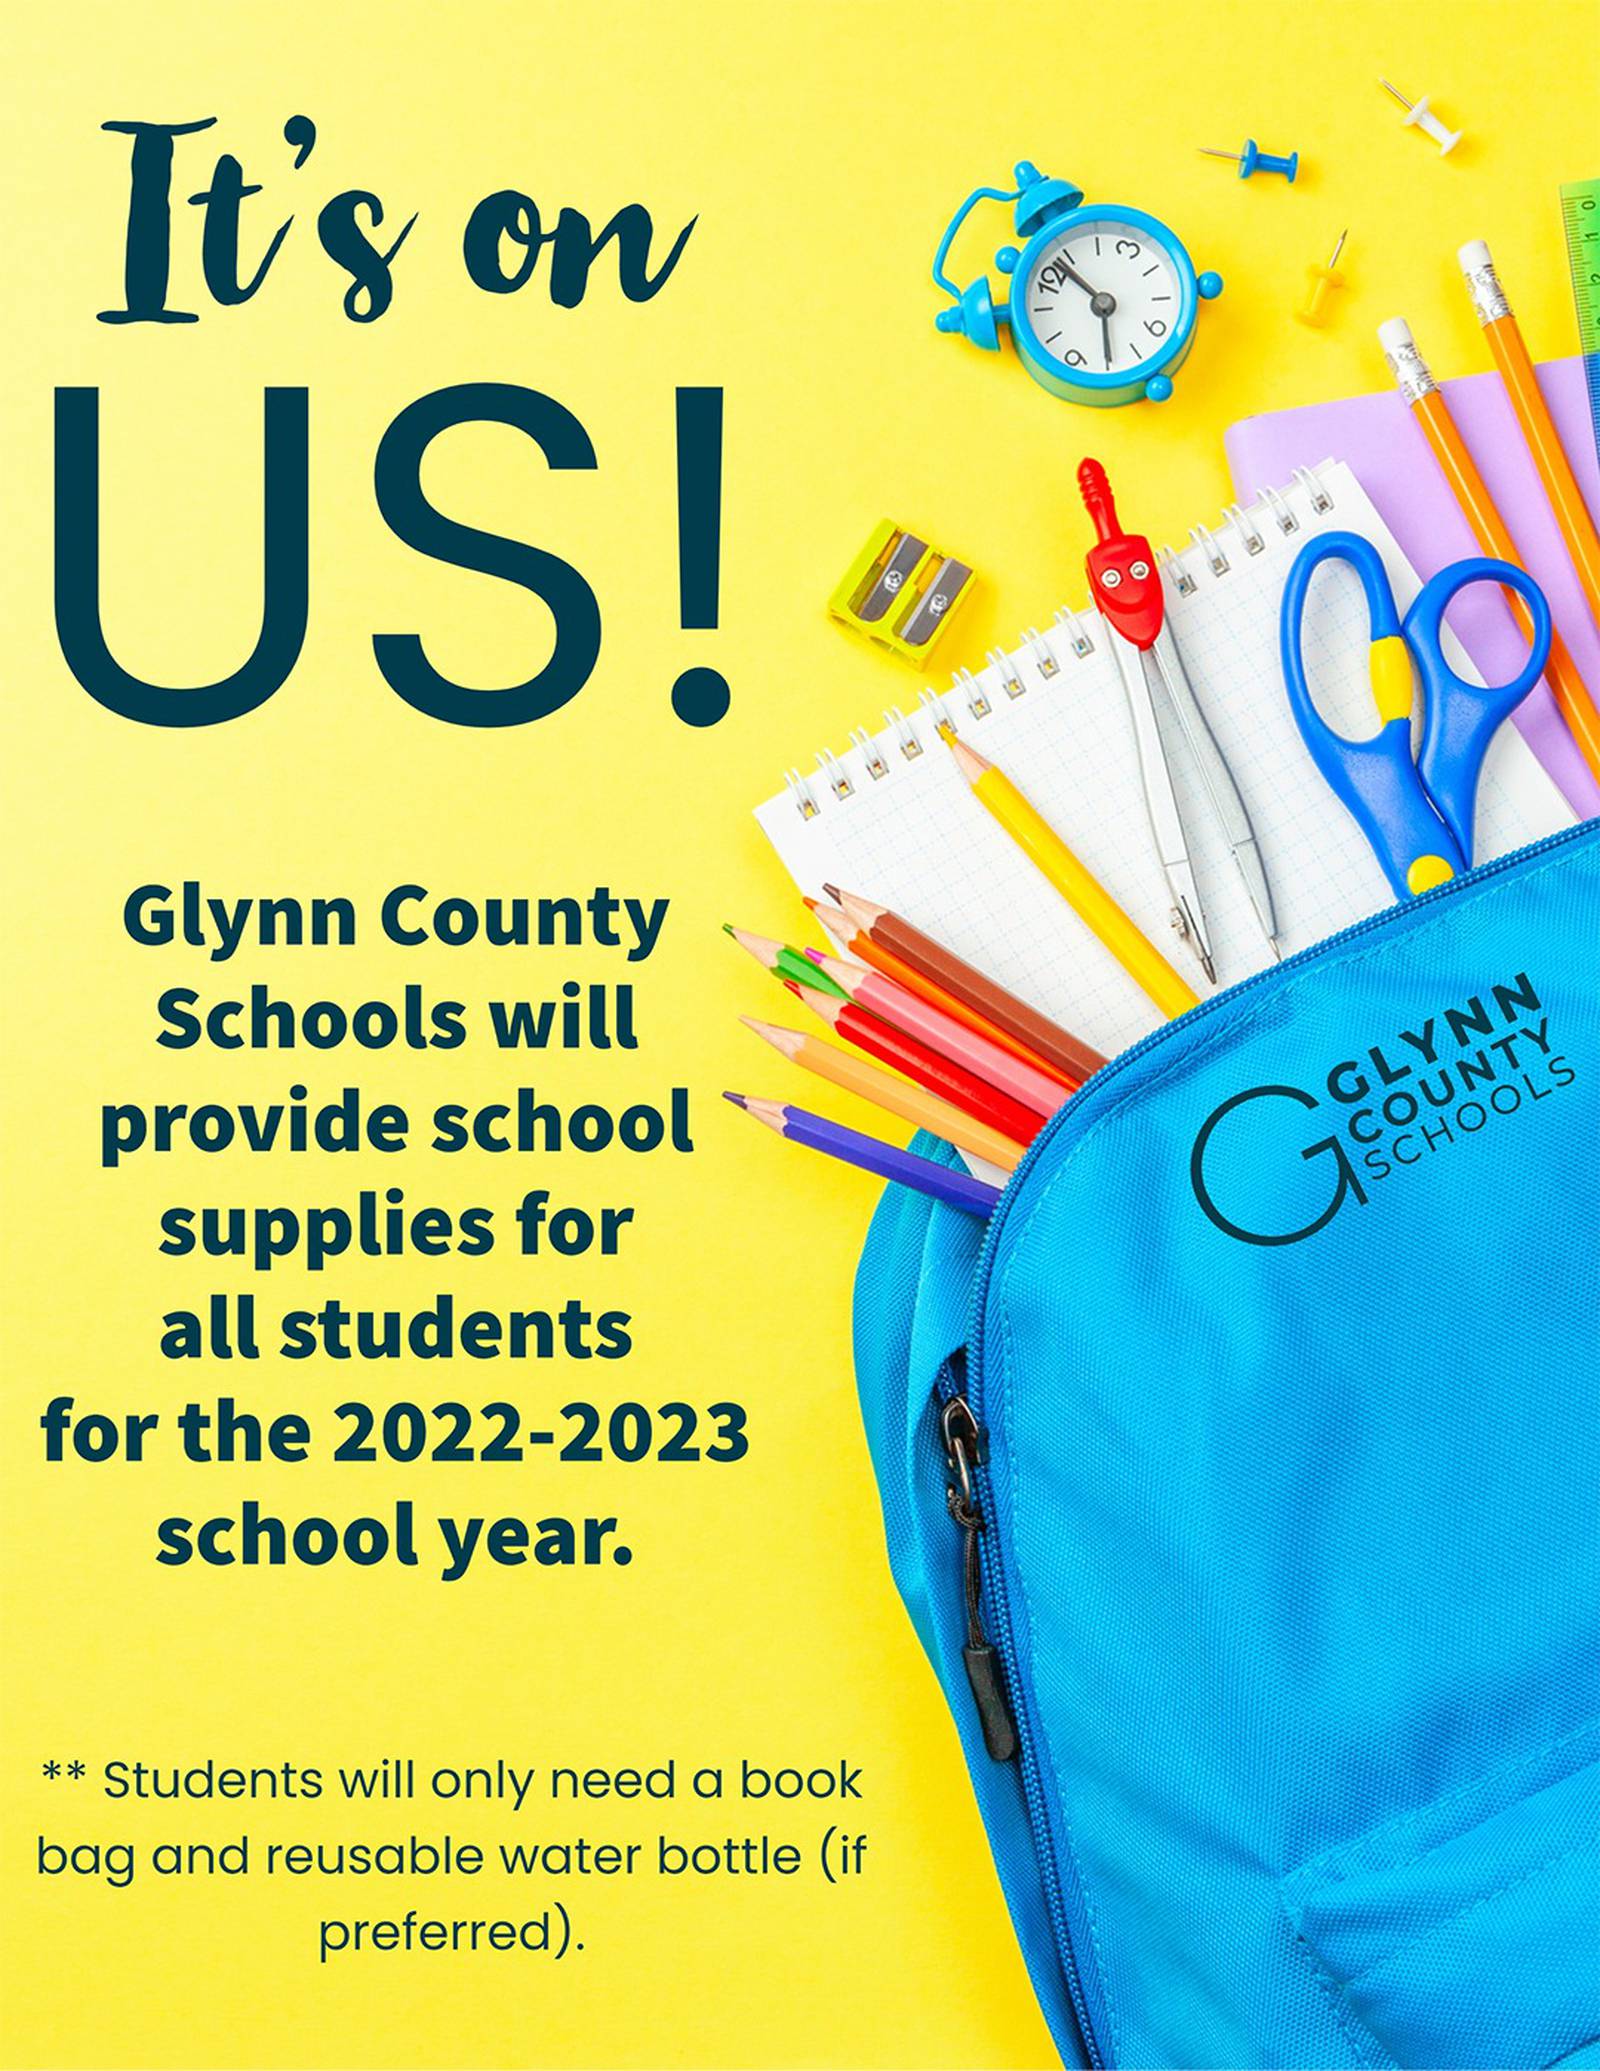 Glynn County schools providing supplies for students in 2022-2023